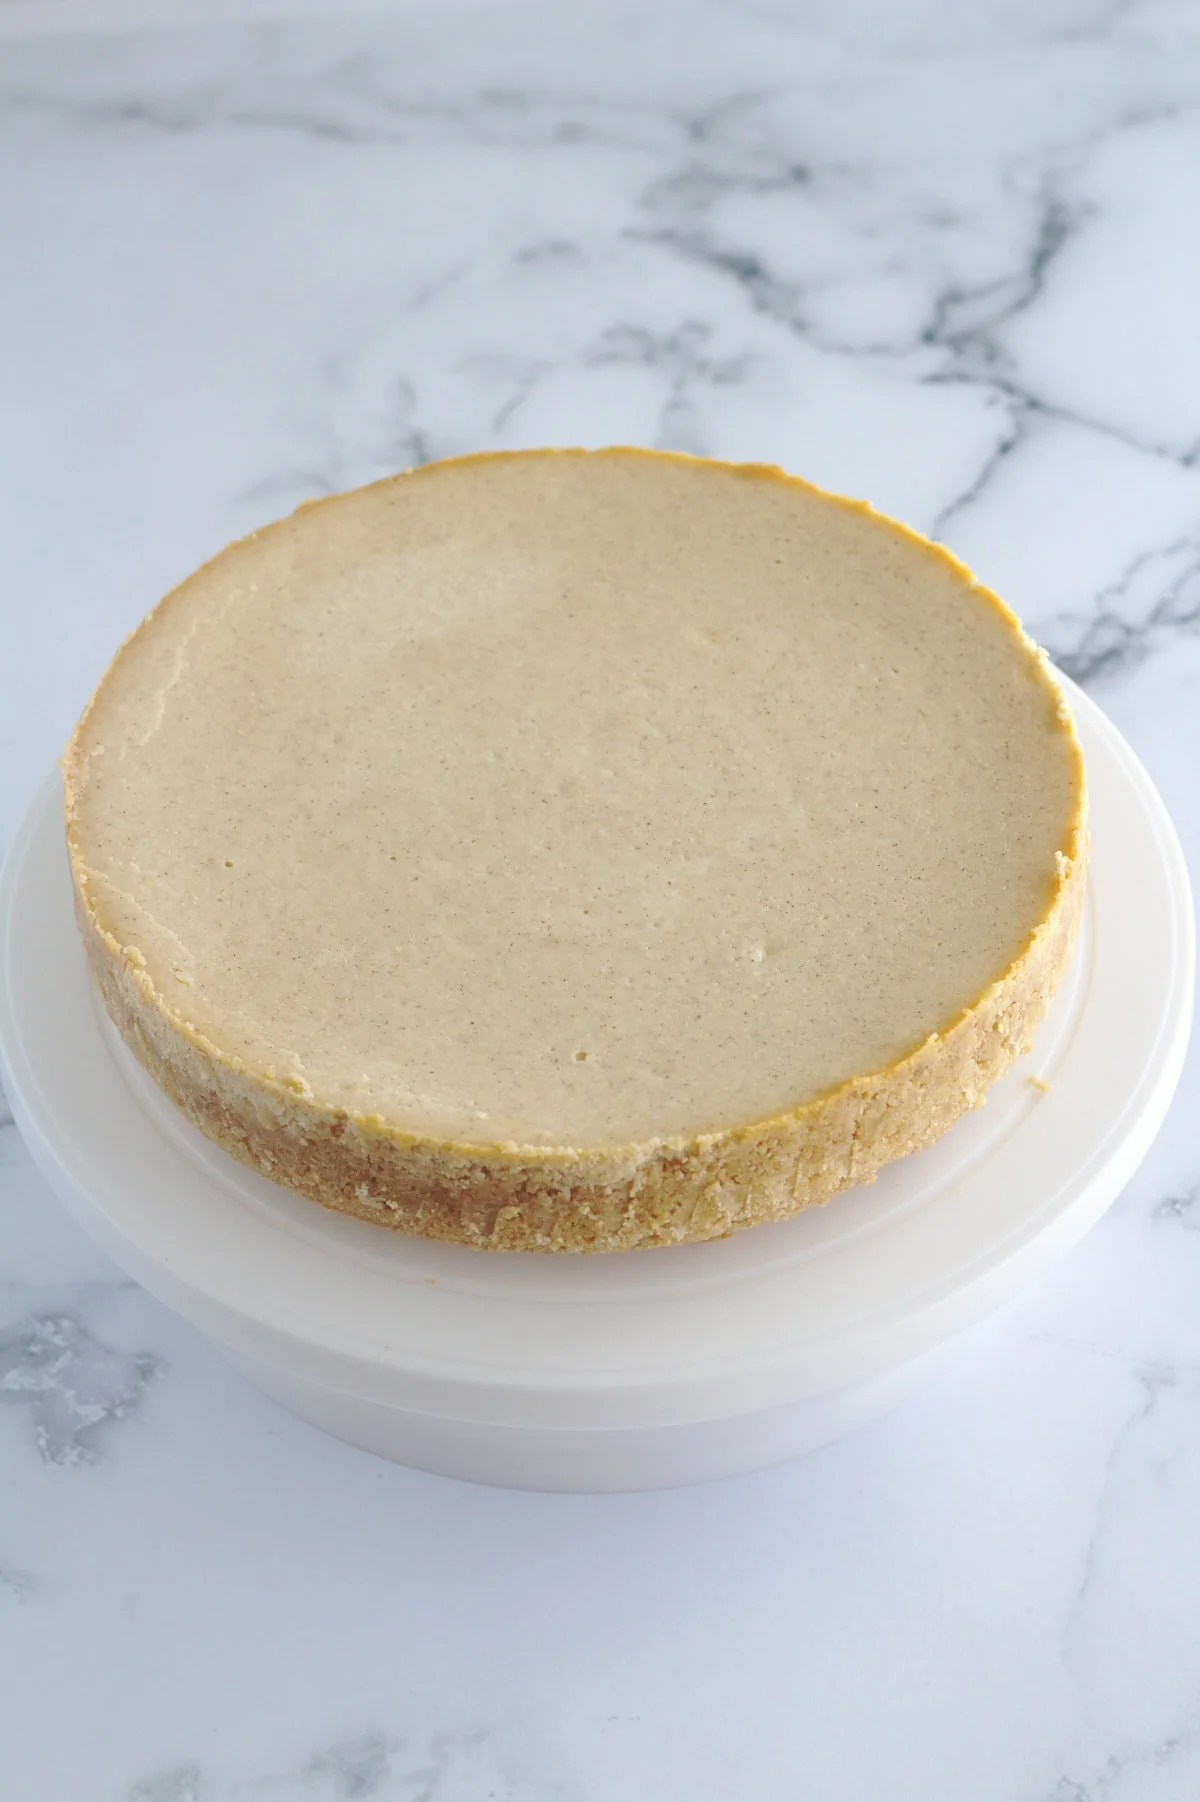 A cheesecake on a white cake stand.